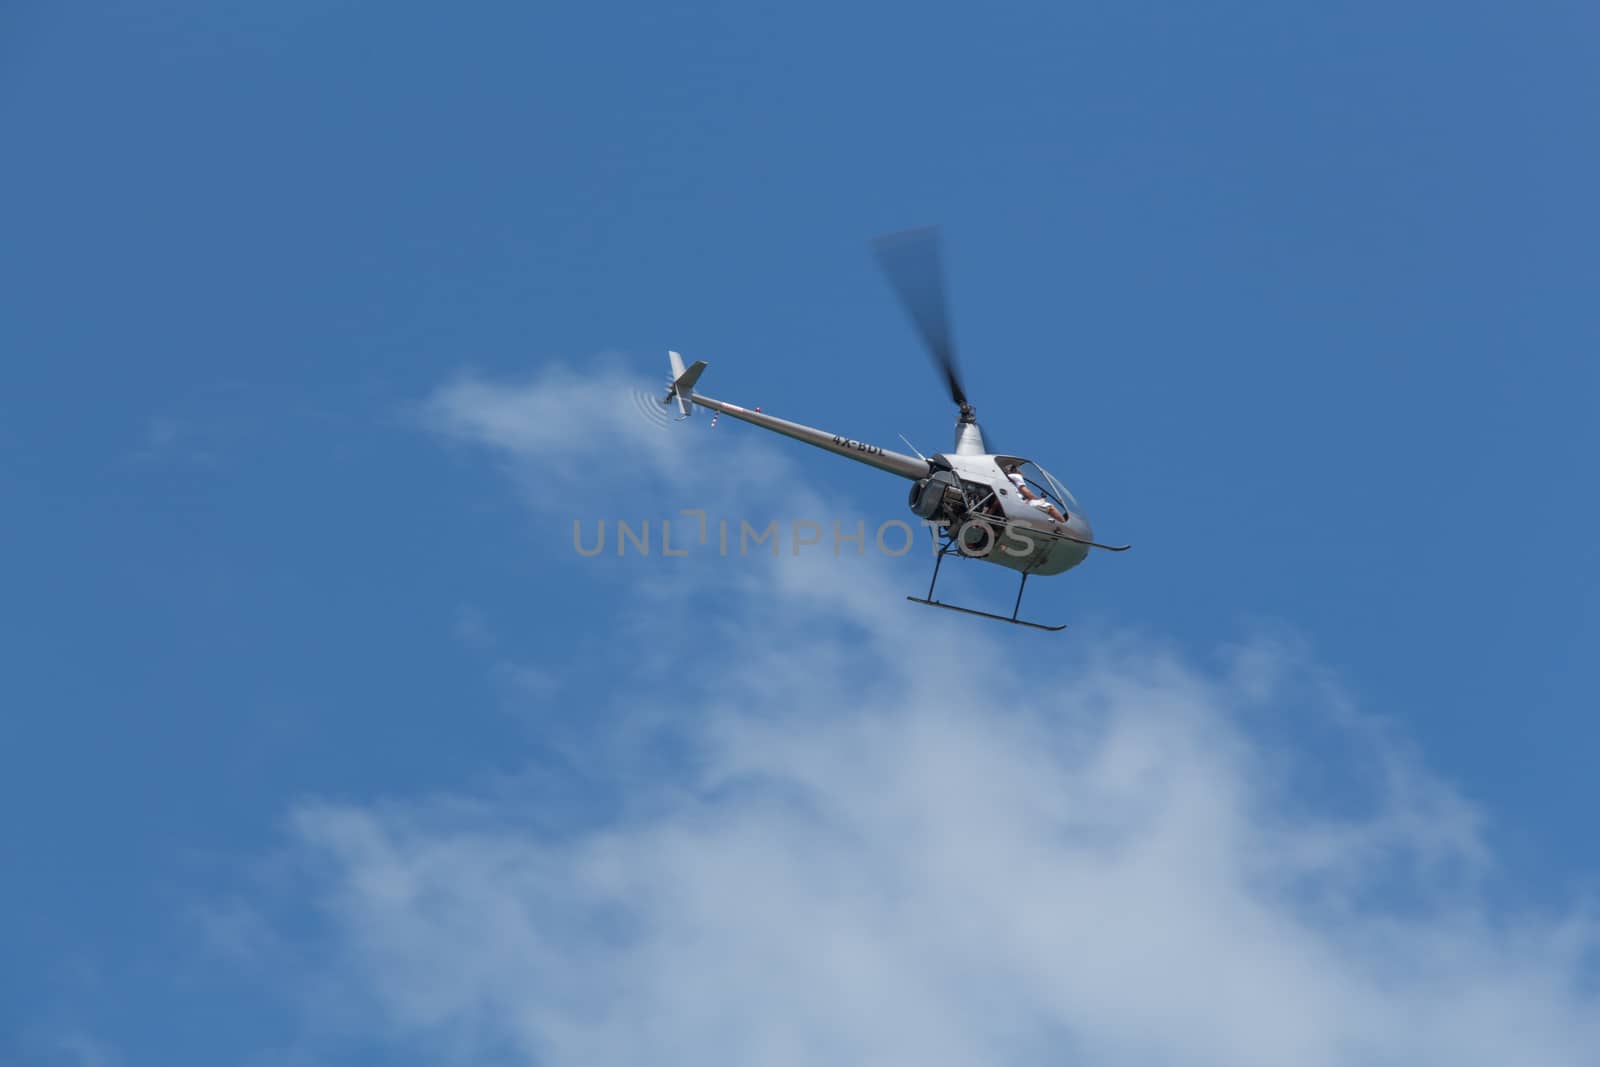 The helicopter in the clouds on a blue sky.